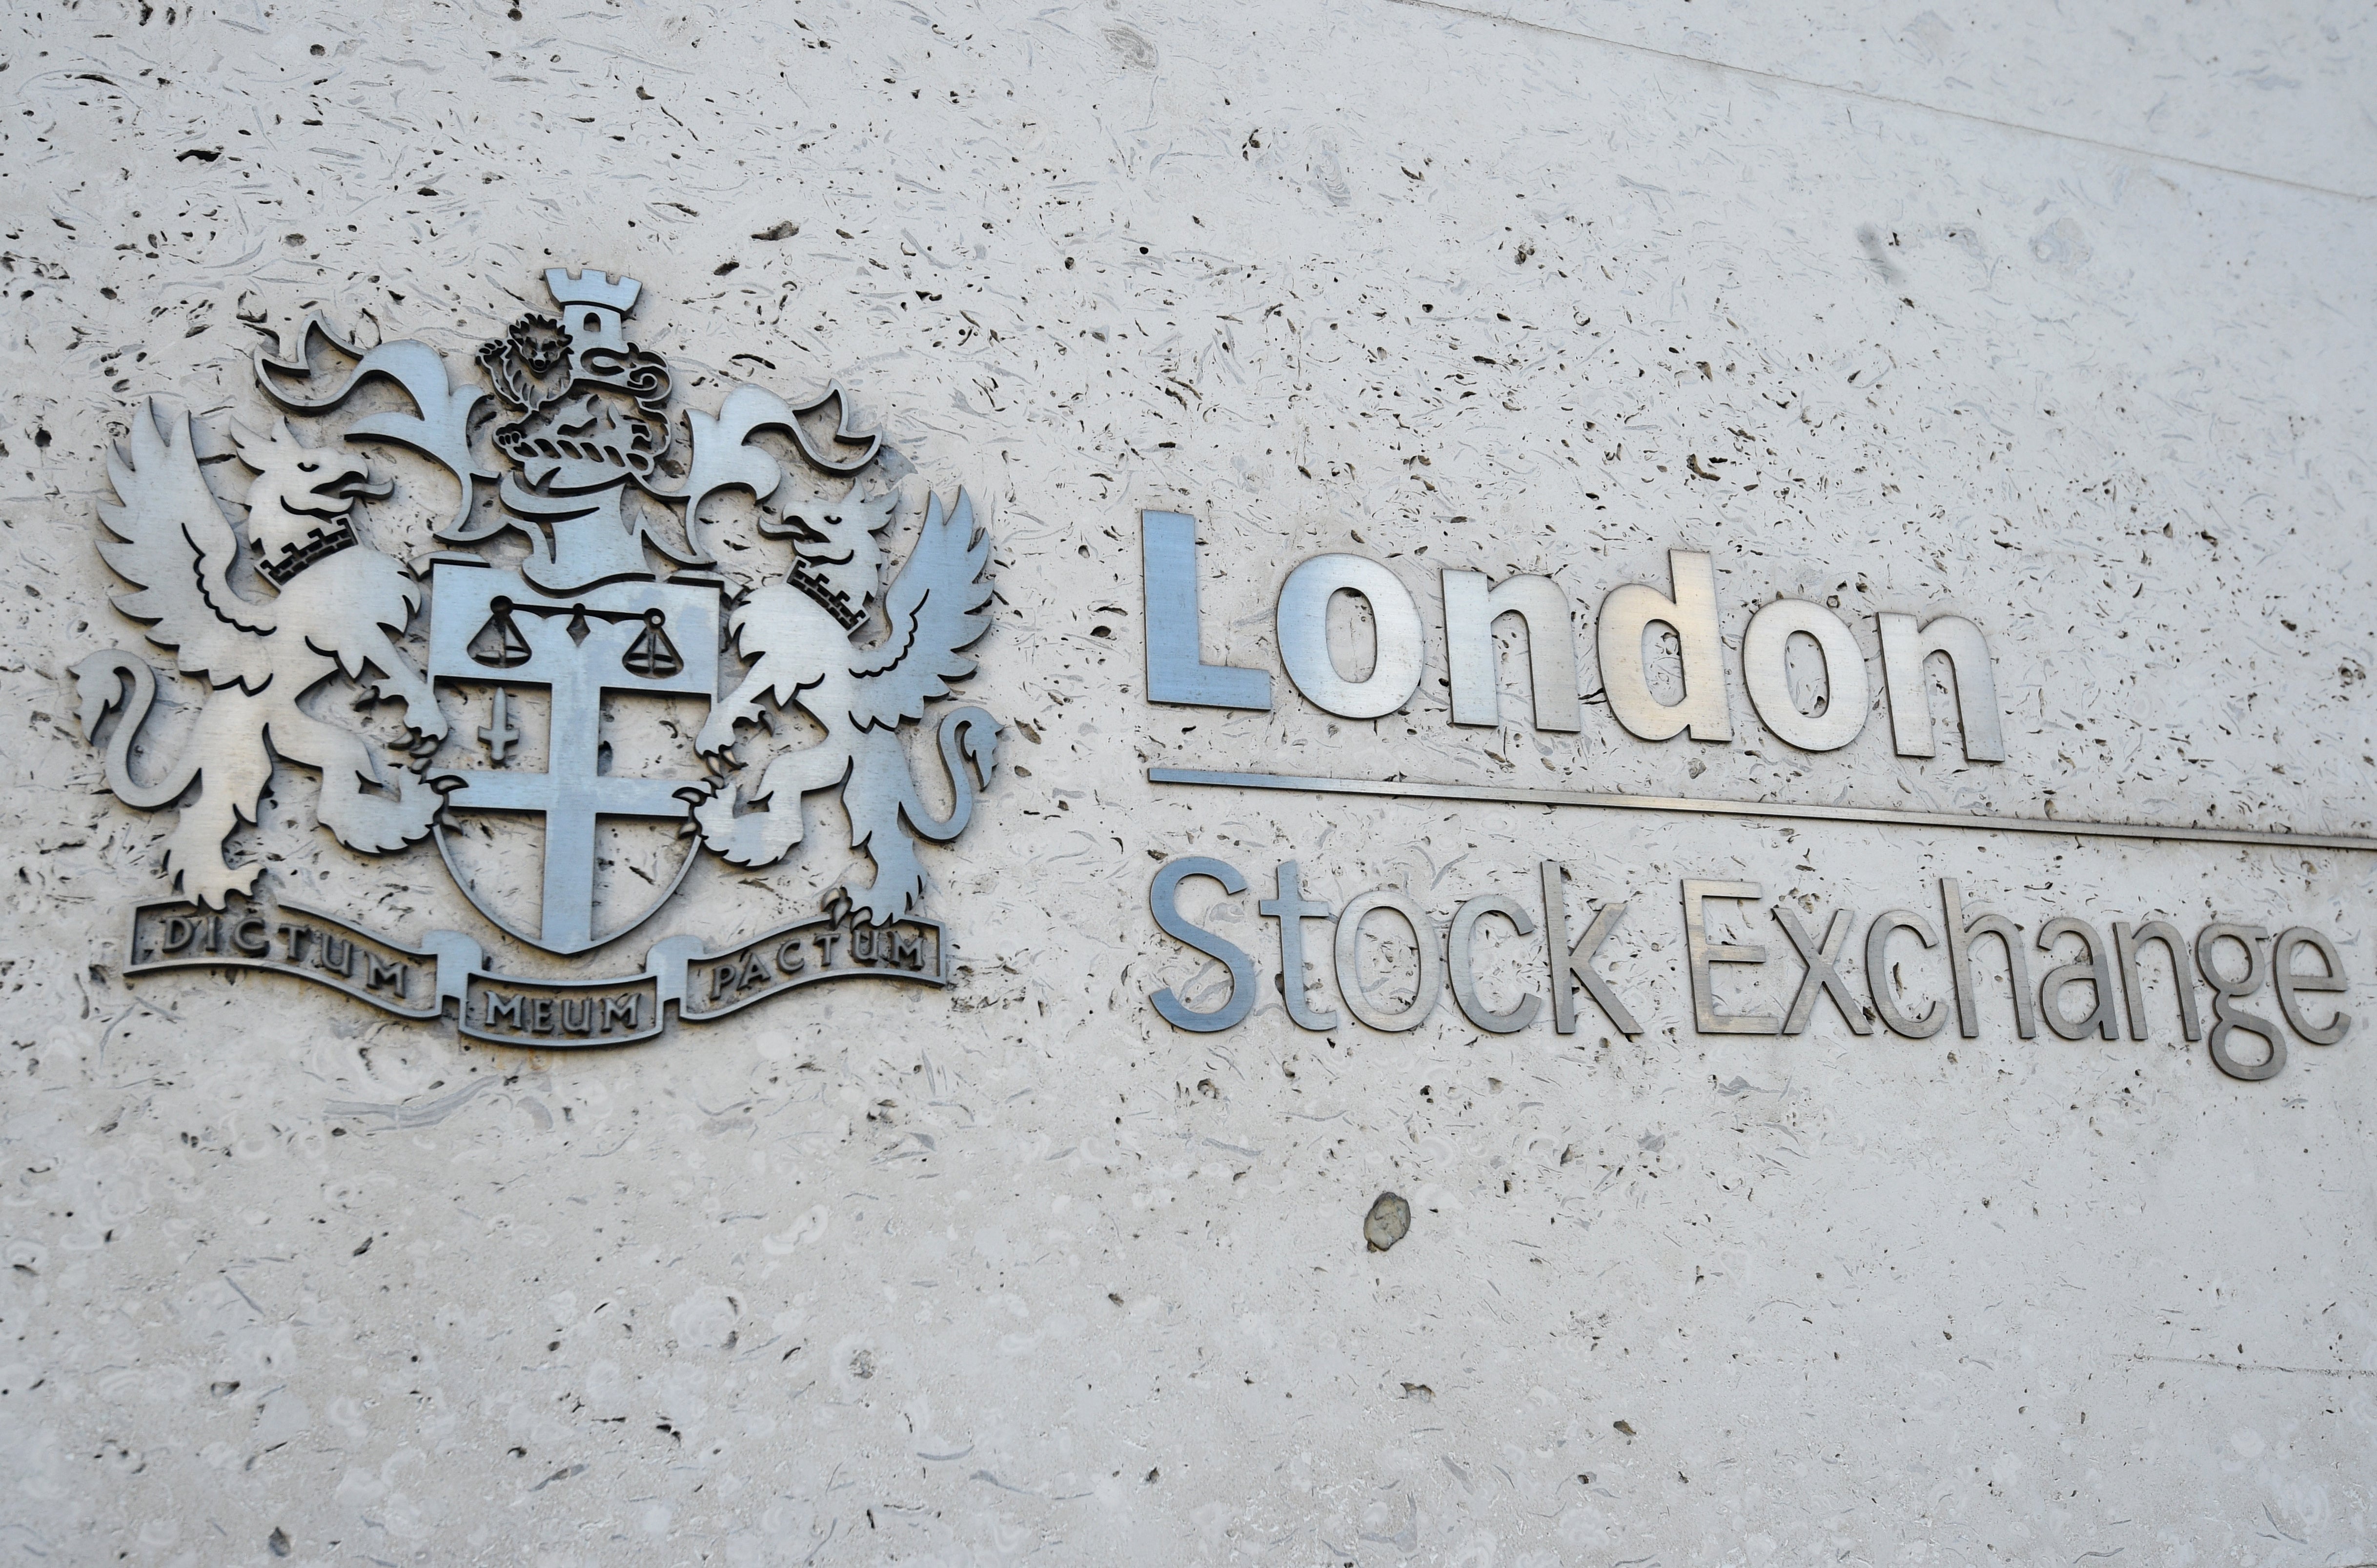 FTSE 100 ends another session unchanged